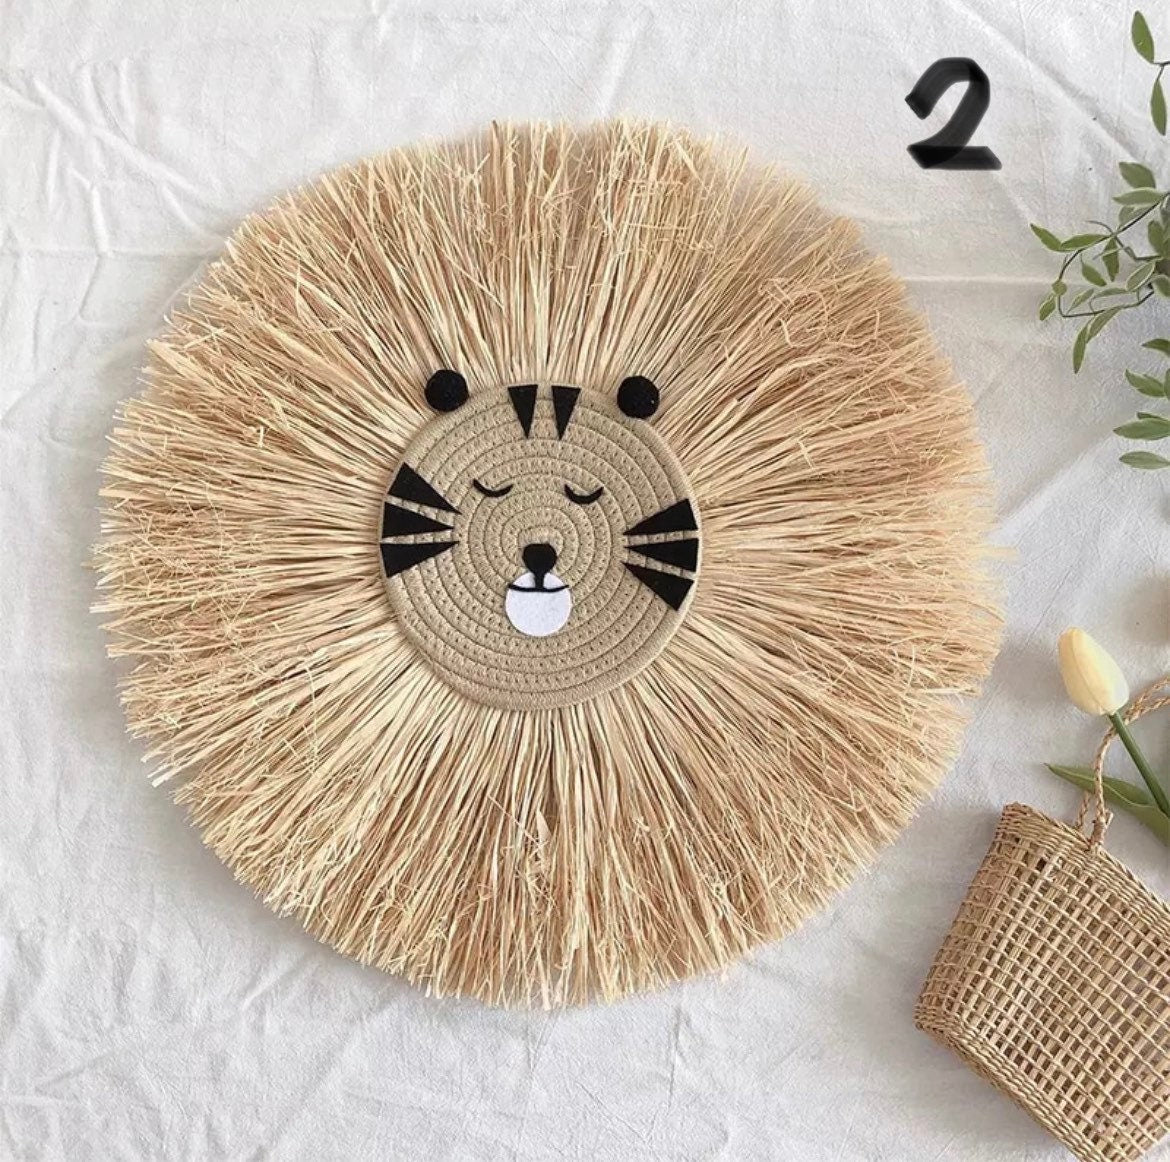 Raffia Lion Face Wall Hanging for Nursery or Nordic / Boho Deco.